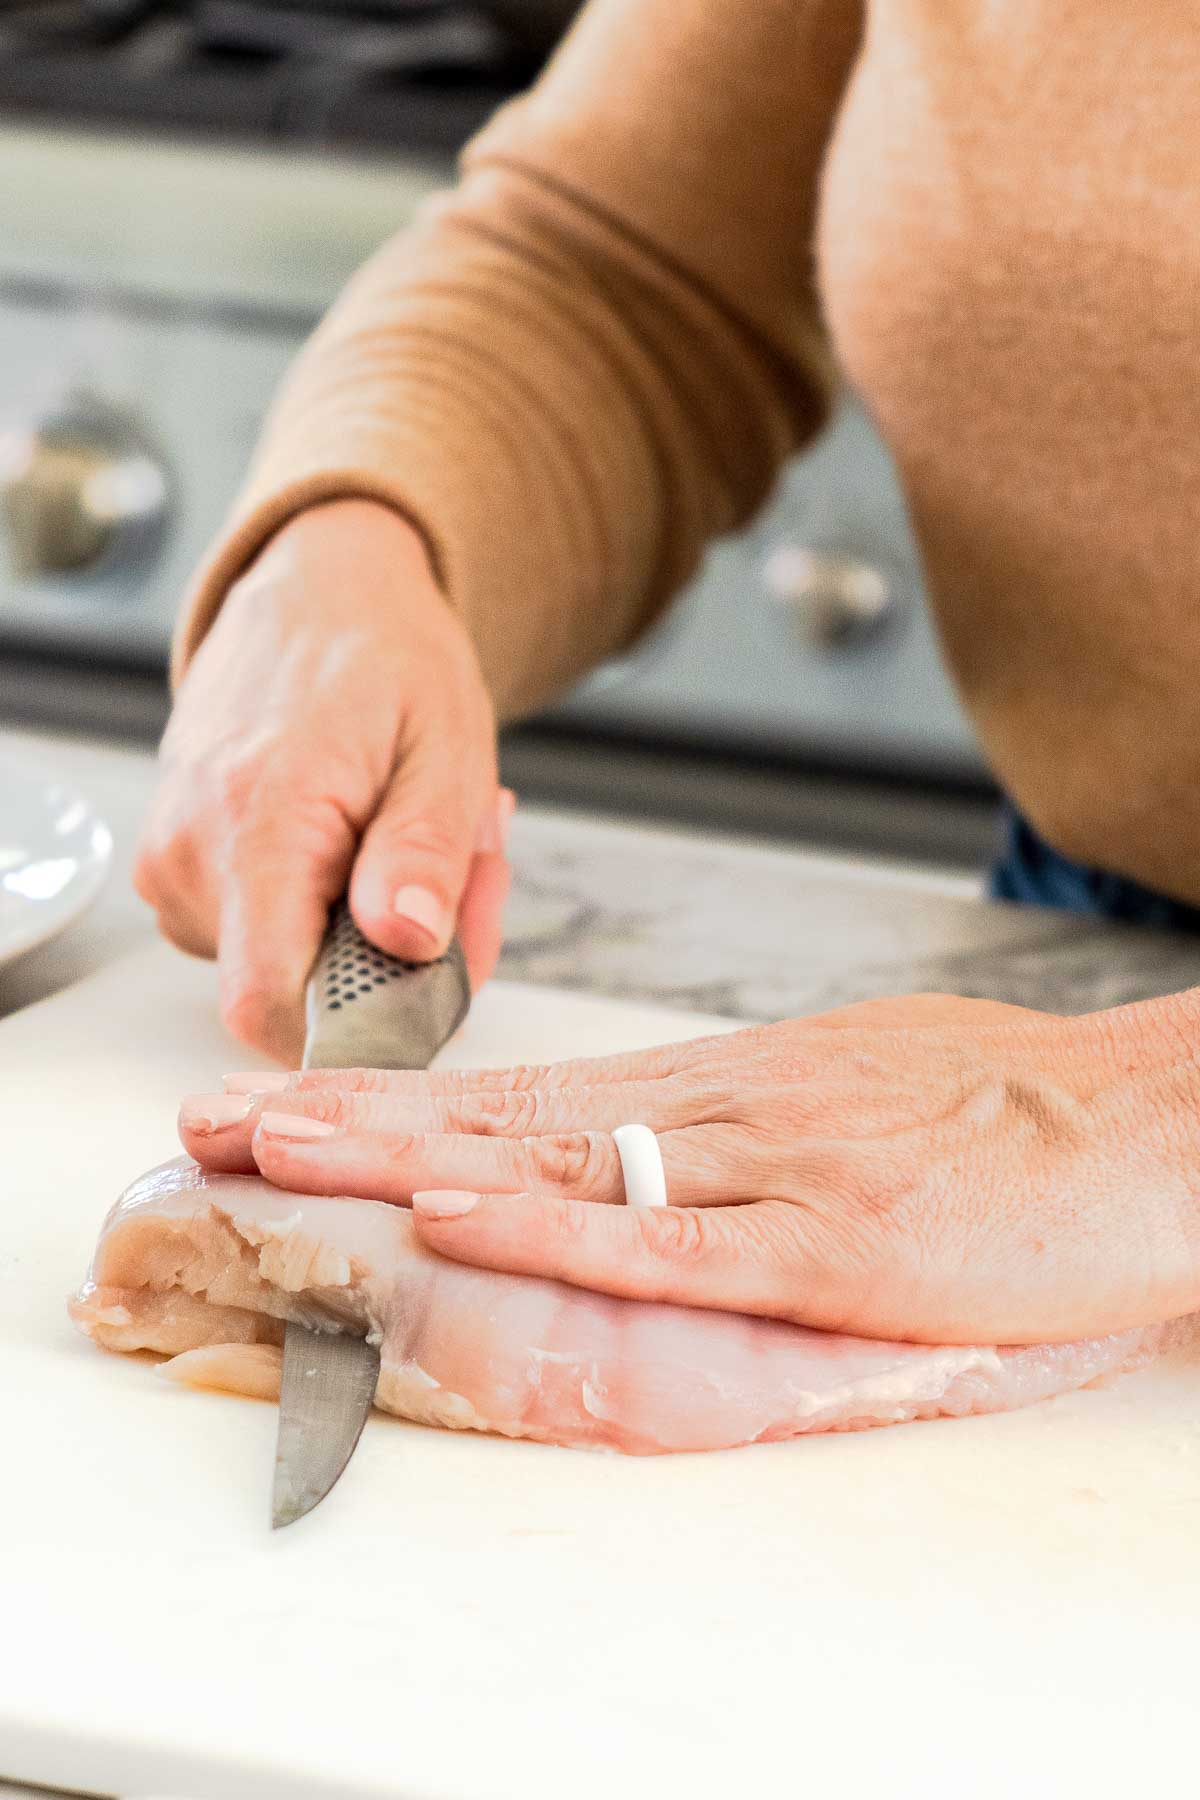 Fileting chicken breast into cutlets